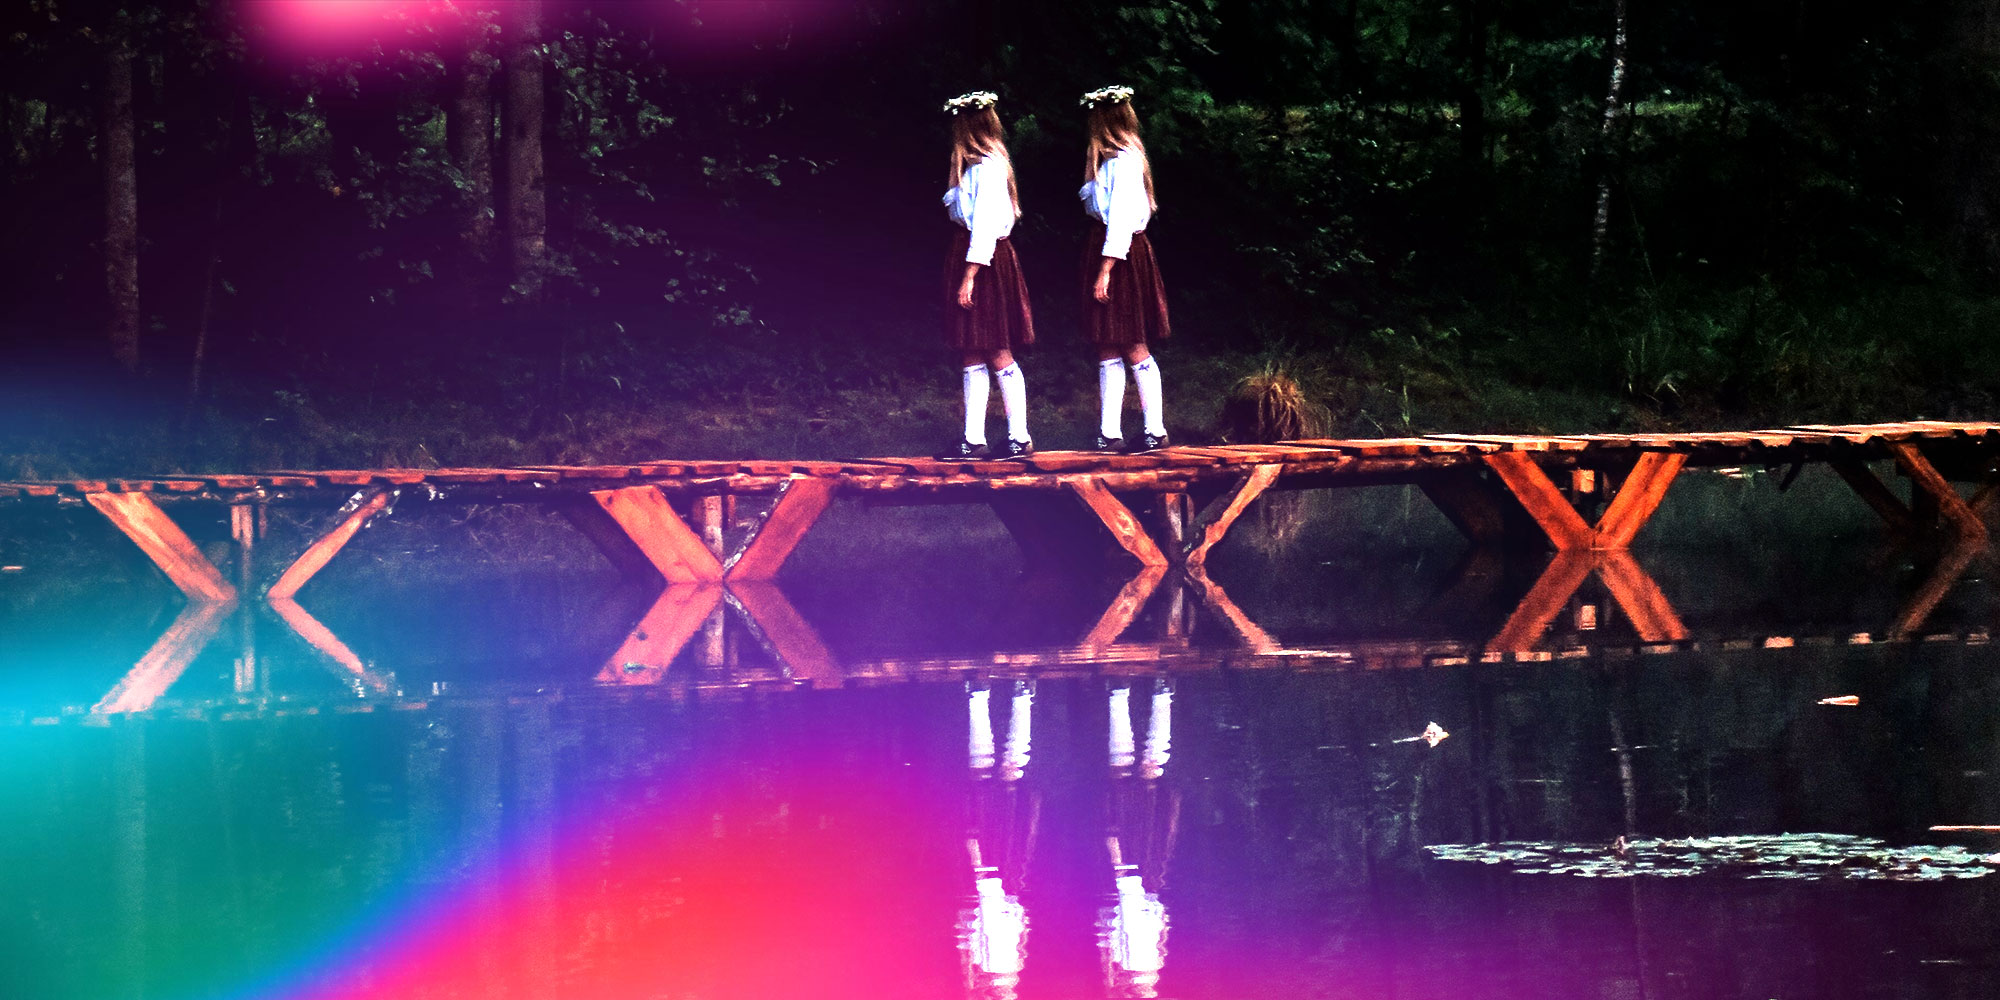 two girls in school uniforms walking across a bridge over the water in a forest